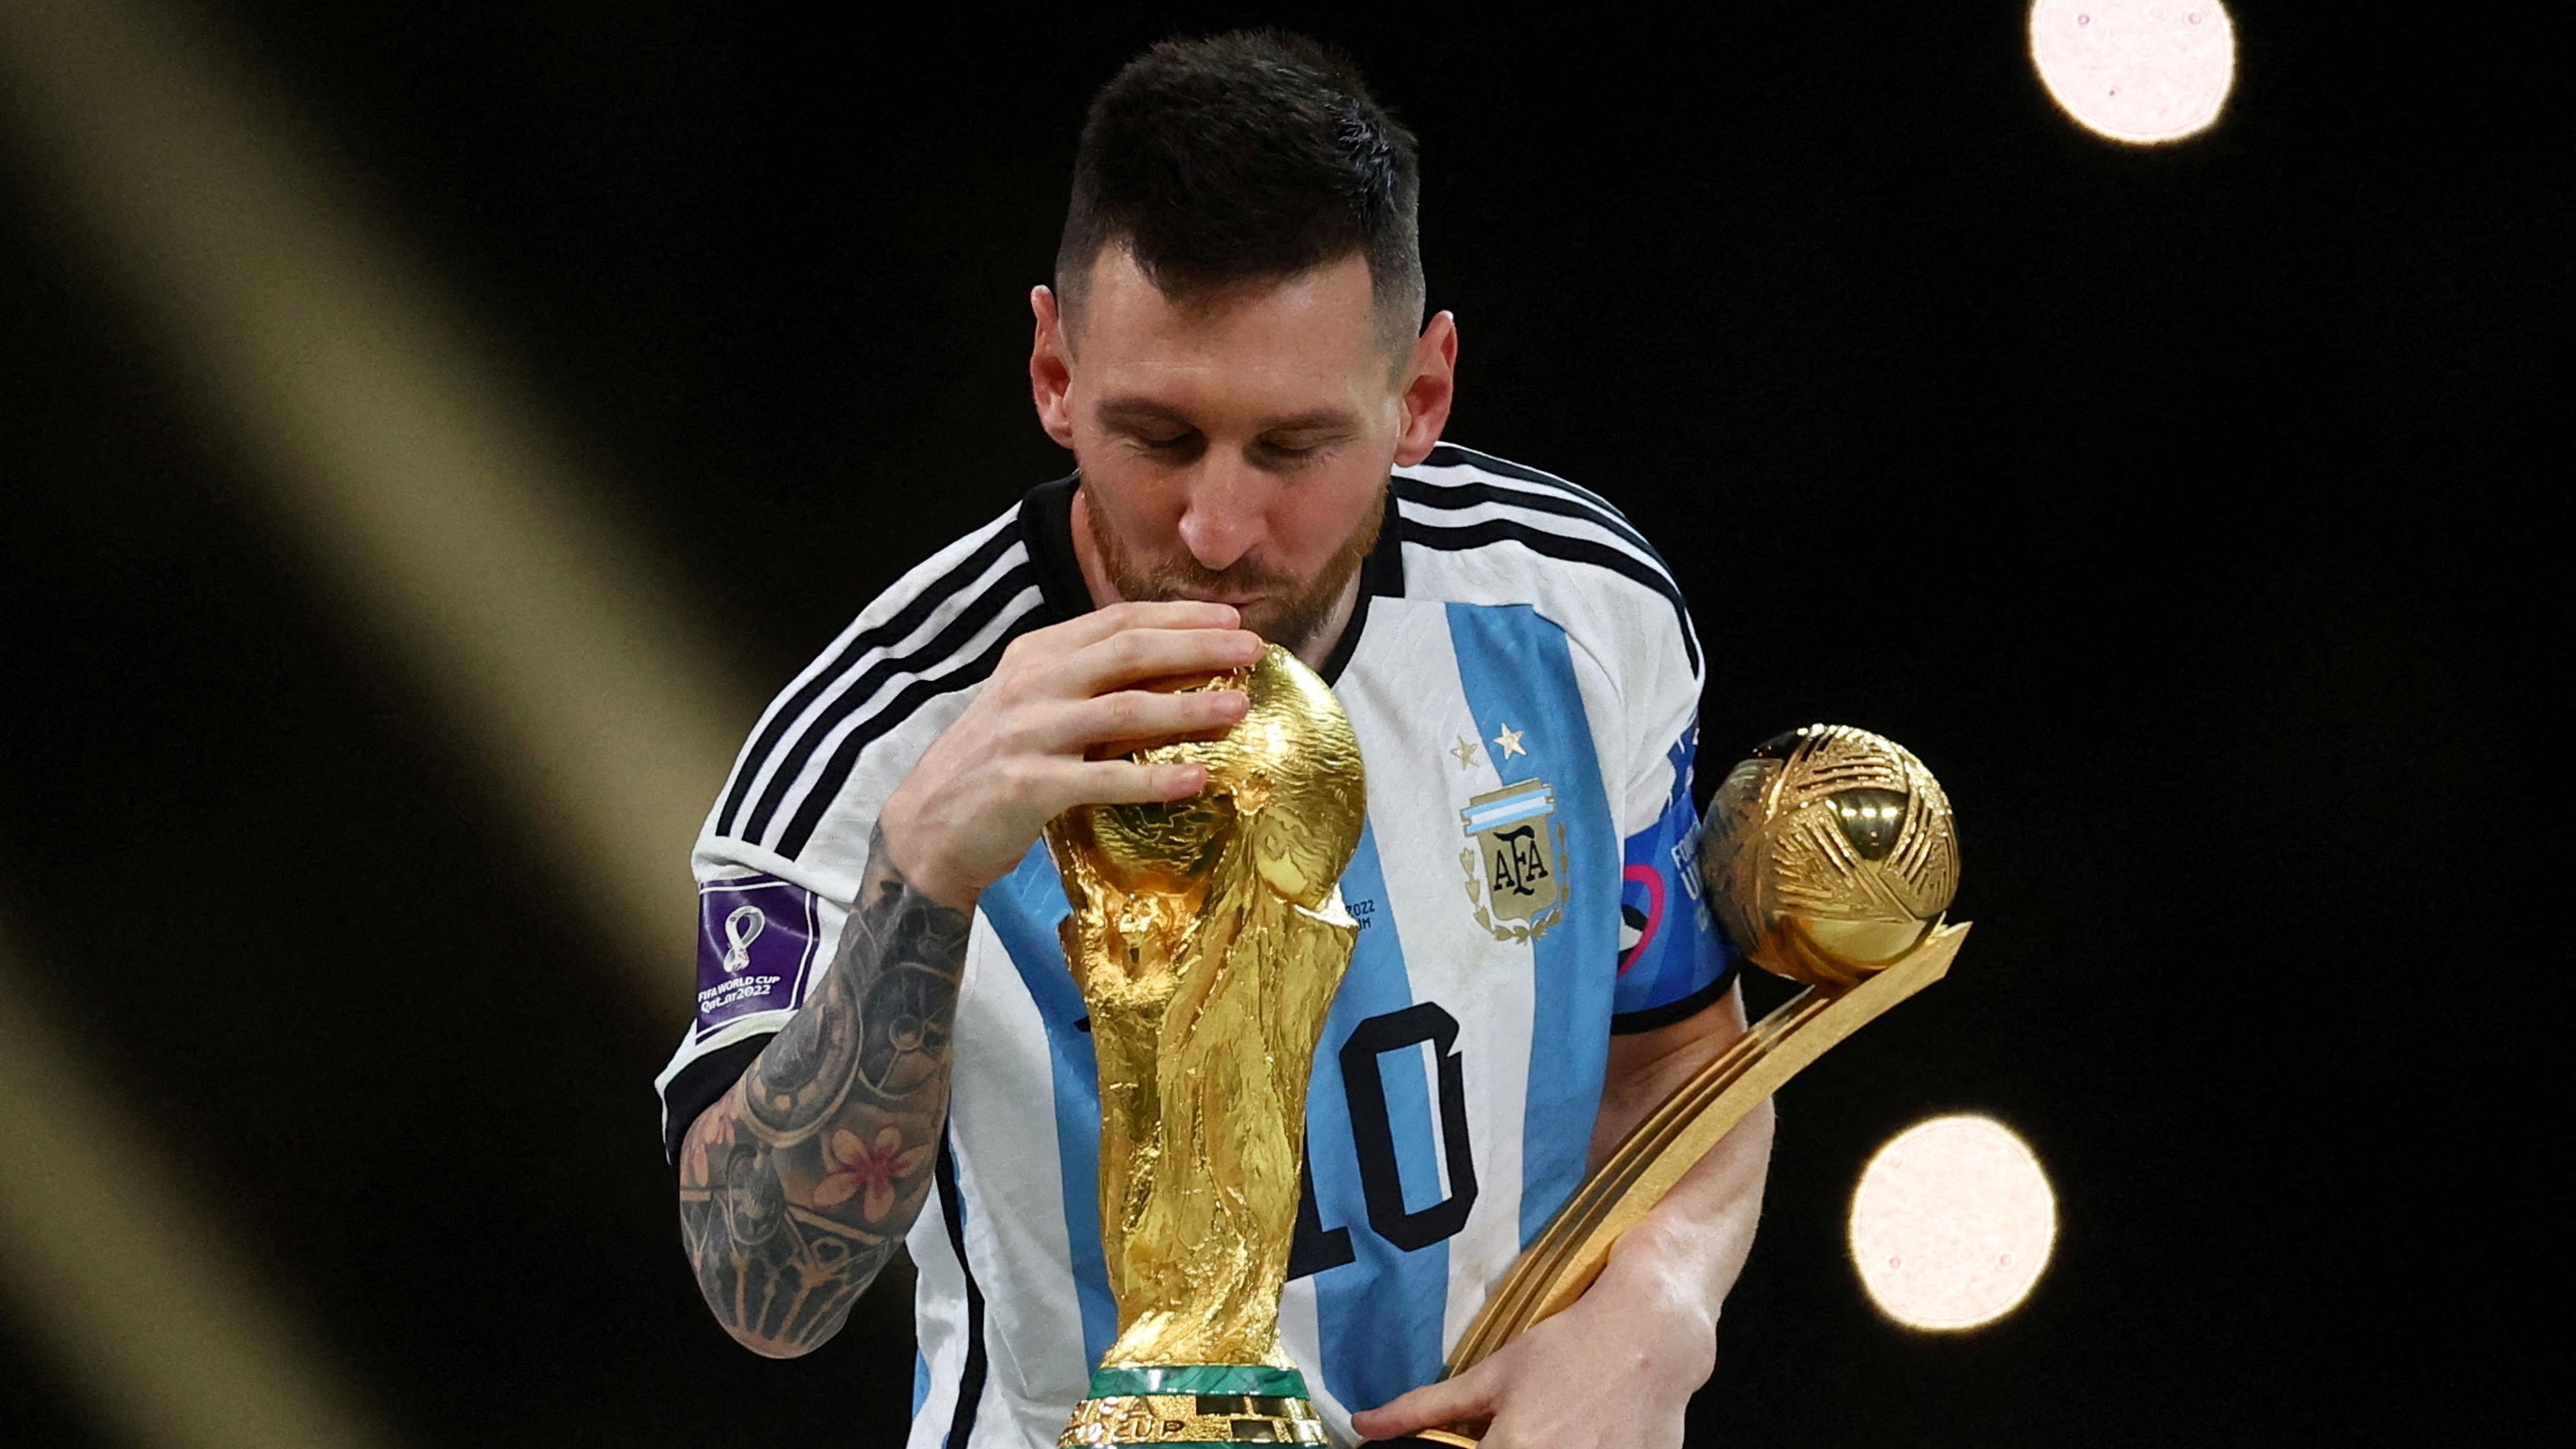 FILE PHOTO: Soccer Football - FIFA World Cup Qatar 2022 - Final - Argentina v France - Lusail Stadium, Lusail, Qatar - December 18, 2022 Argentina's Lionel Messi kisses the World Cup trophy after receiving the Golden Ball award as he celebrates after winning the World Cup REUTERS/Kai Pfaffenbach/File Photo